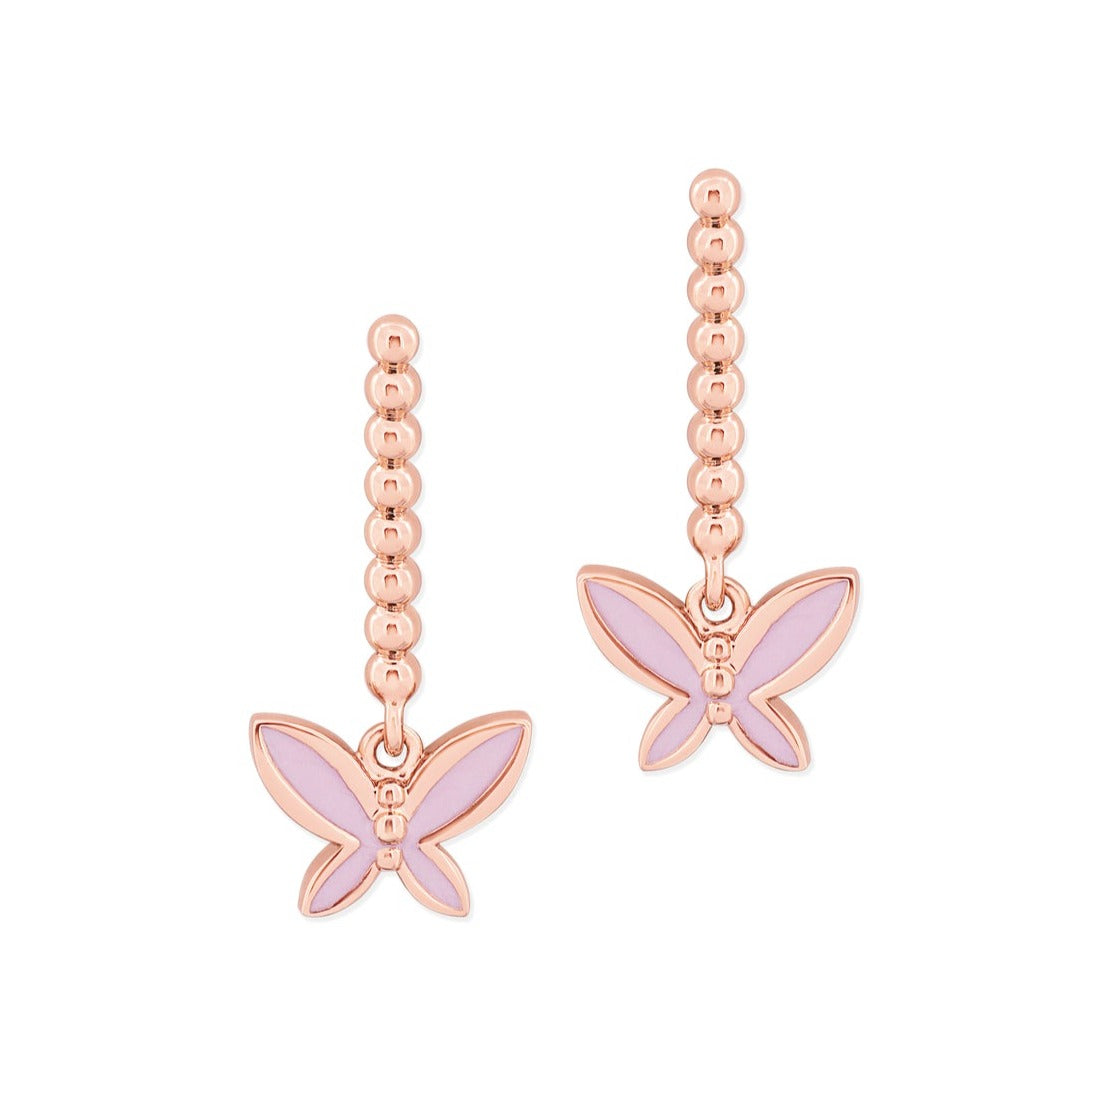 Tipperary Crystal Butterfly Drop Earrings  Drawing inspiration from urban garden, the Tipperary Crystal Butterfly collection transforms an icon into something modern and unexpected. Playful and elegant, this collection draws from the inherent beauty of the butterfly. 